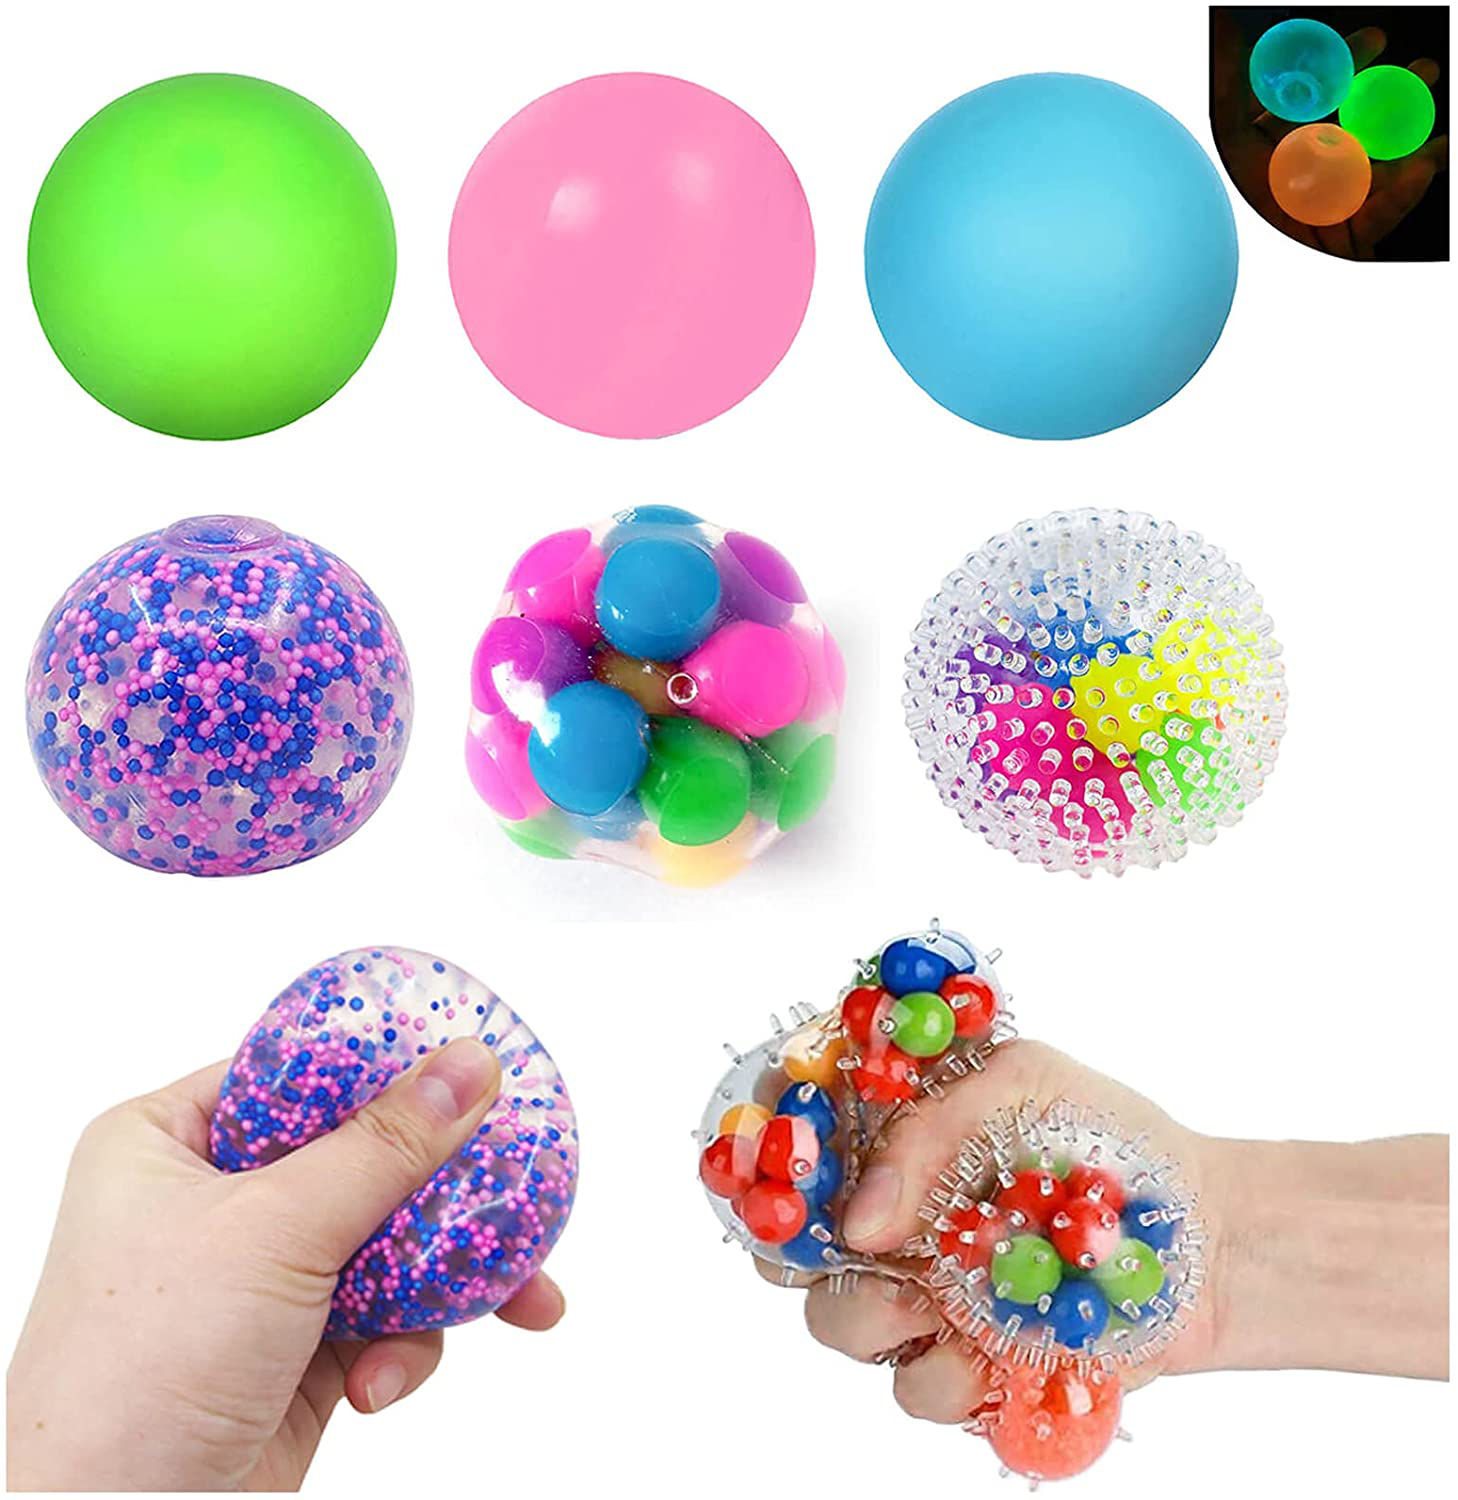 Squeeze Ball Toy Mix 2Pcs Sensory Fidget Toy Squishy Rainbow Stress Ball with DNA Colorful Beads Stress-Relief and Better Focus Toy Stress Balls for Kids Stress Relief Ball for Adults 